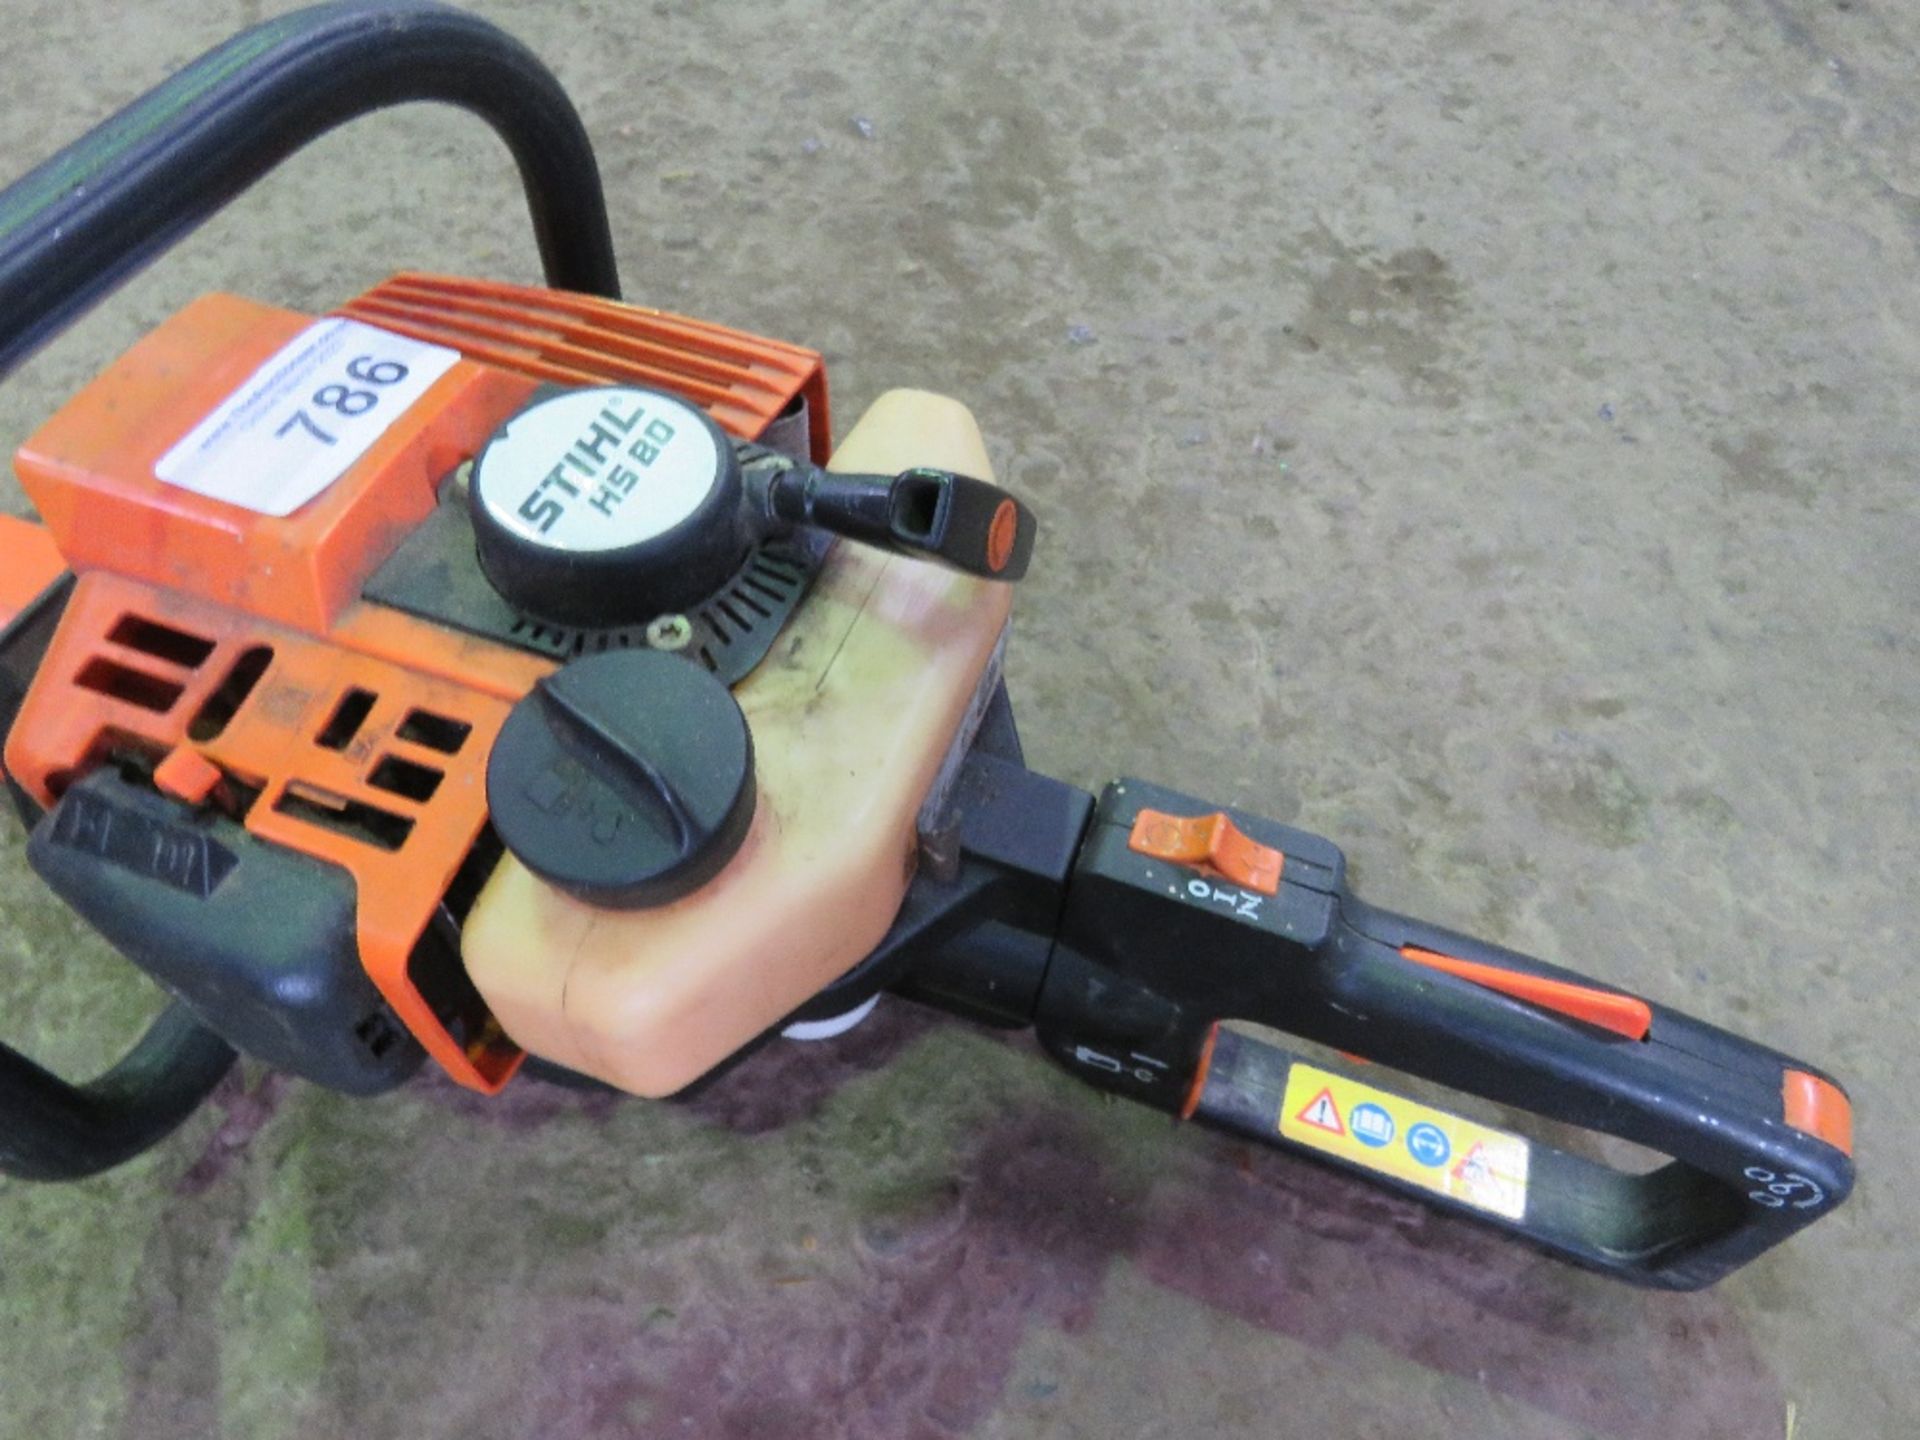 STIHL HS80 PETROL ENGINED HEDGE CUTTER. DIRECT FROM RETIRING BUILDER. THIS LOT IS SOLD UNDE - Image 2 of 4